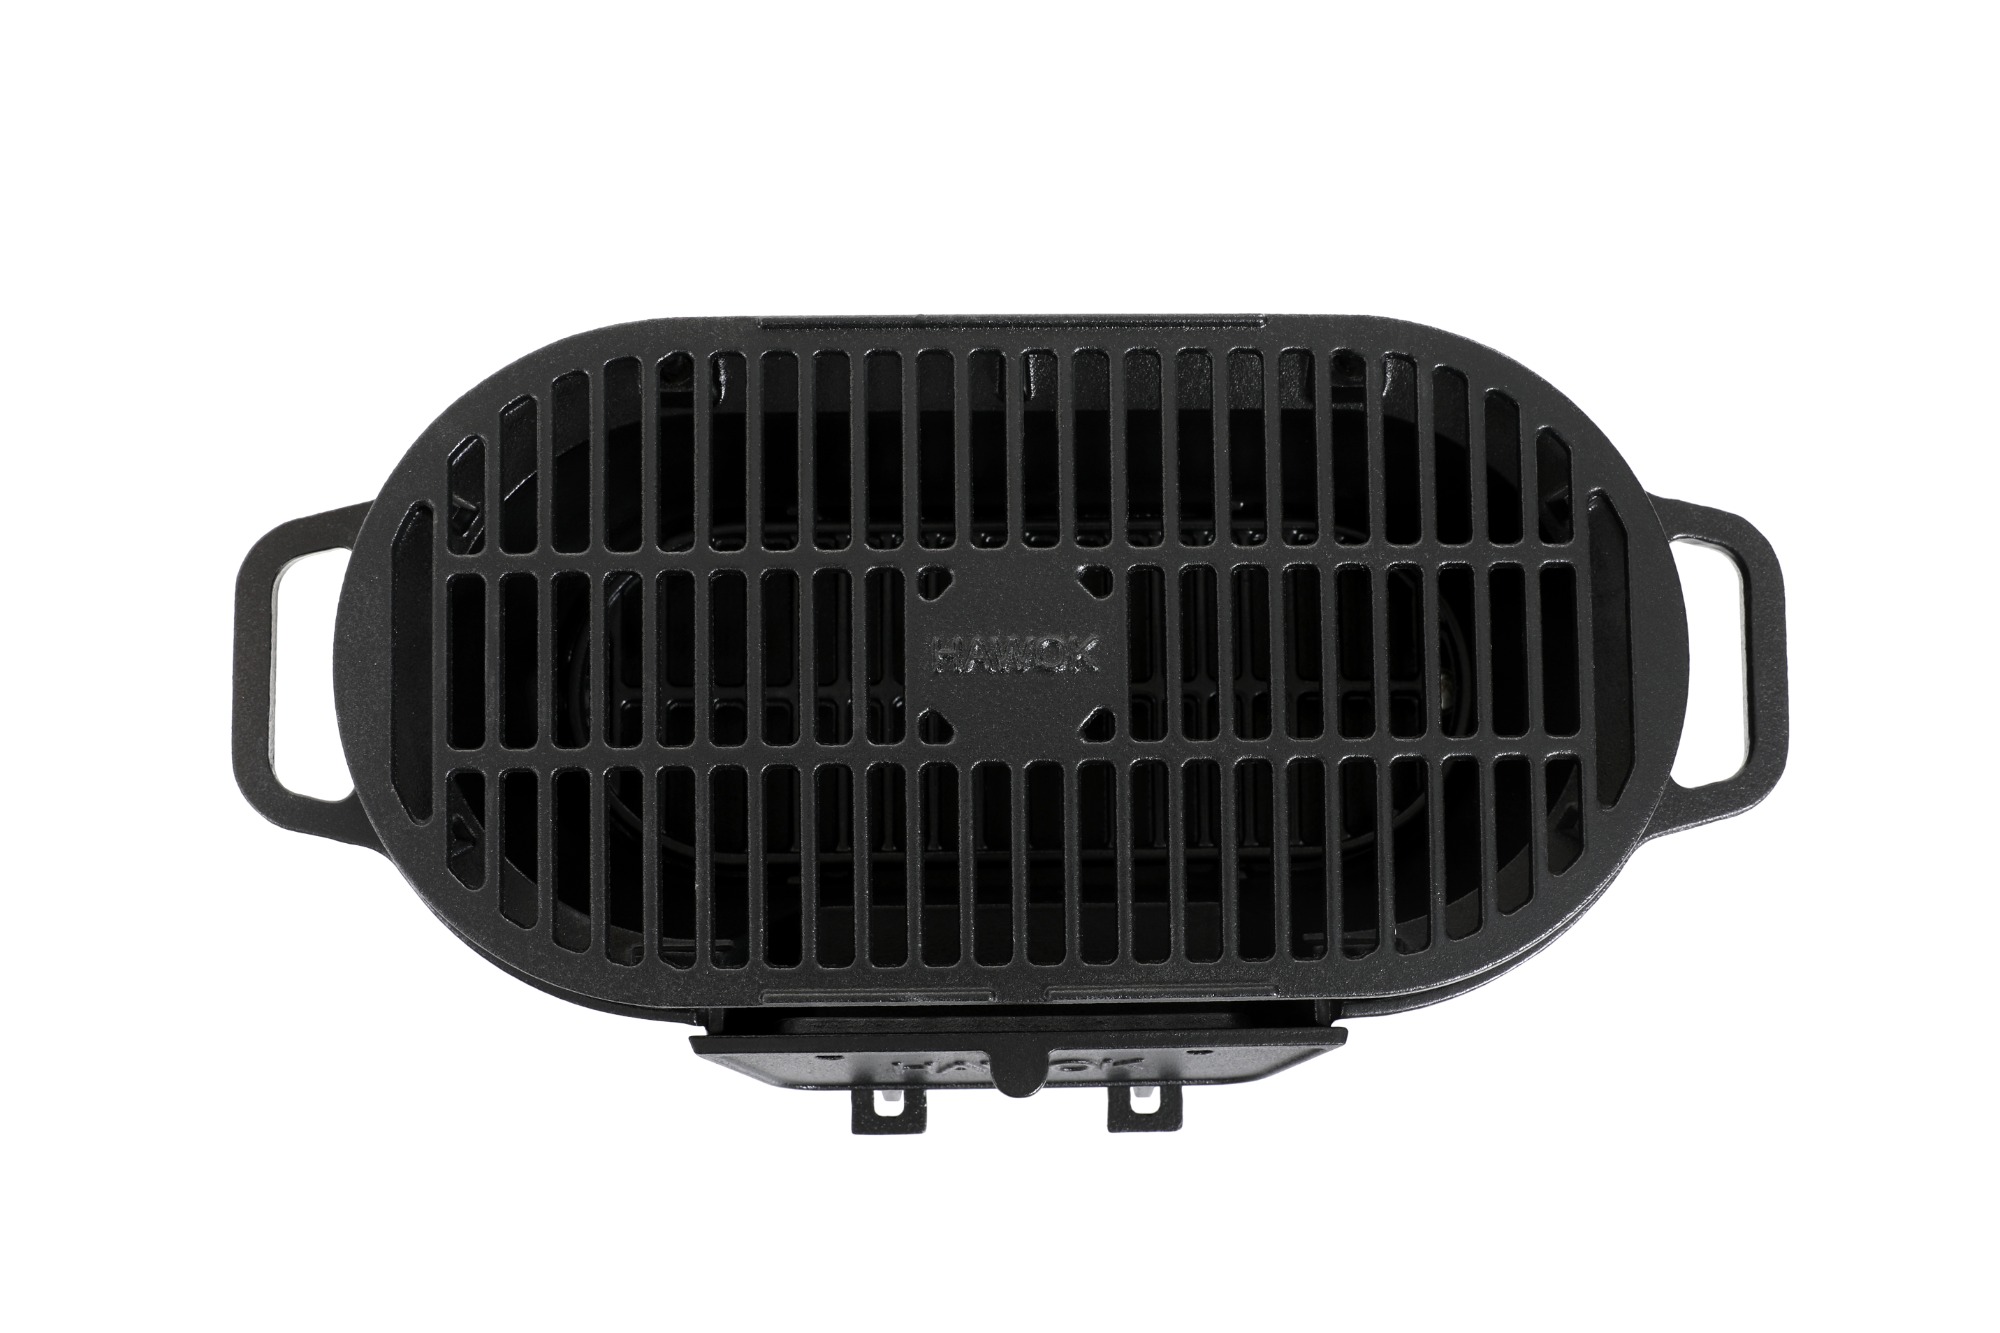 Kay Home Cast Iron Charcoal Hibachi Grill